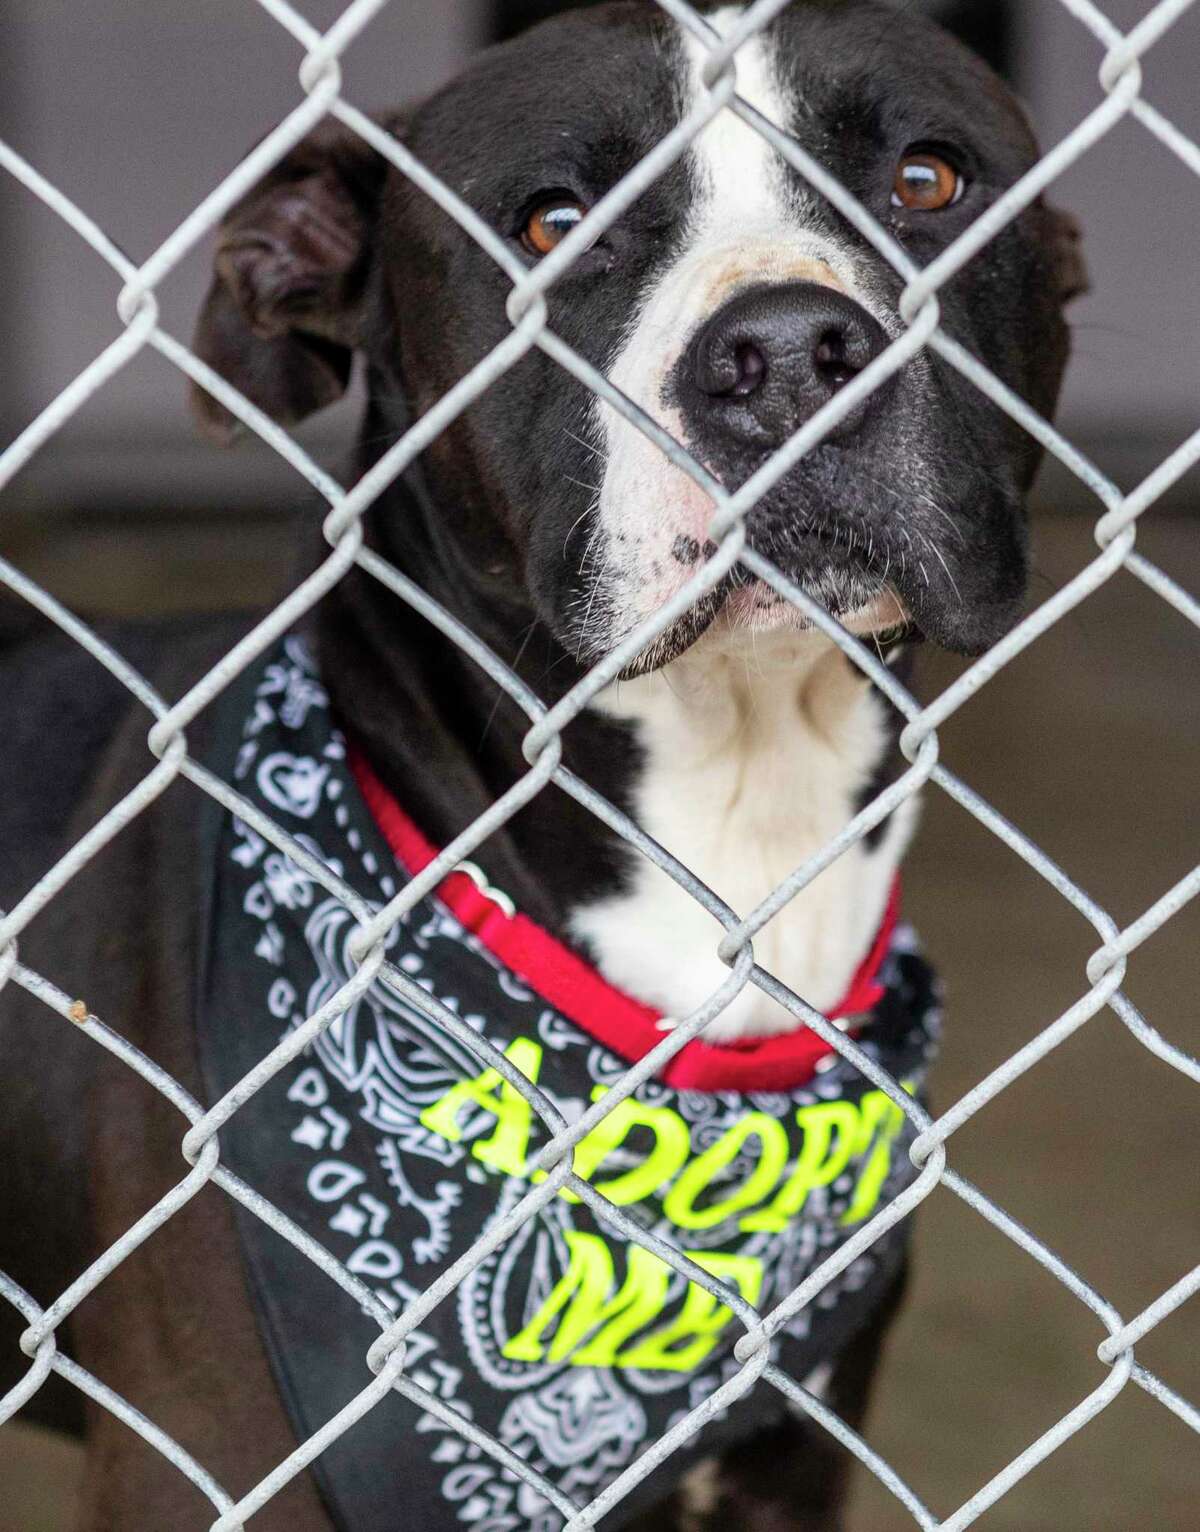 A dog waits April 19, 2022, for adoption at the San Marcos Regional Animal Shelter. As the human population along the I-35 corridor between Austin and San Antonio continues to boom, shelters are struggling to deal with overcrowding of unwanted pets.